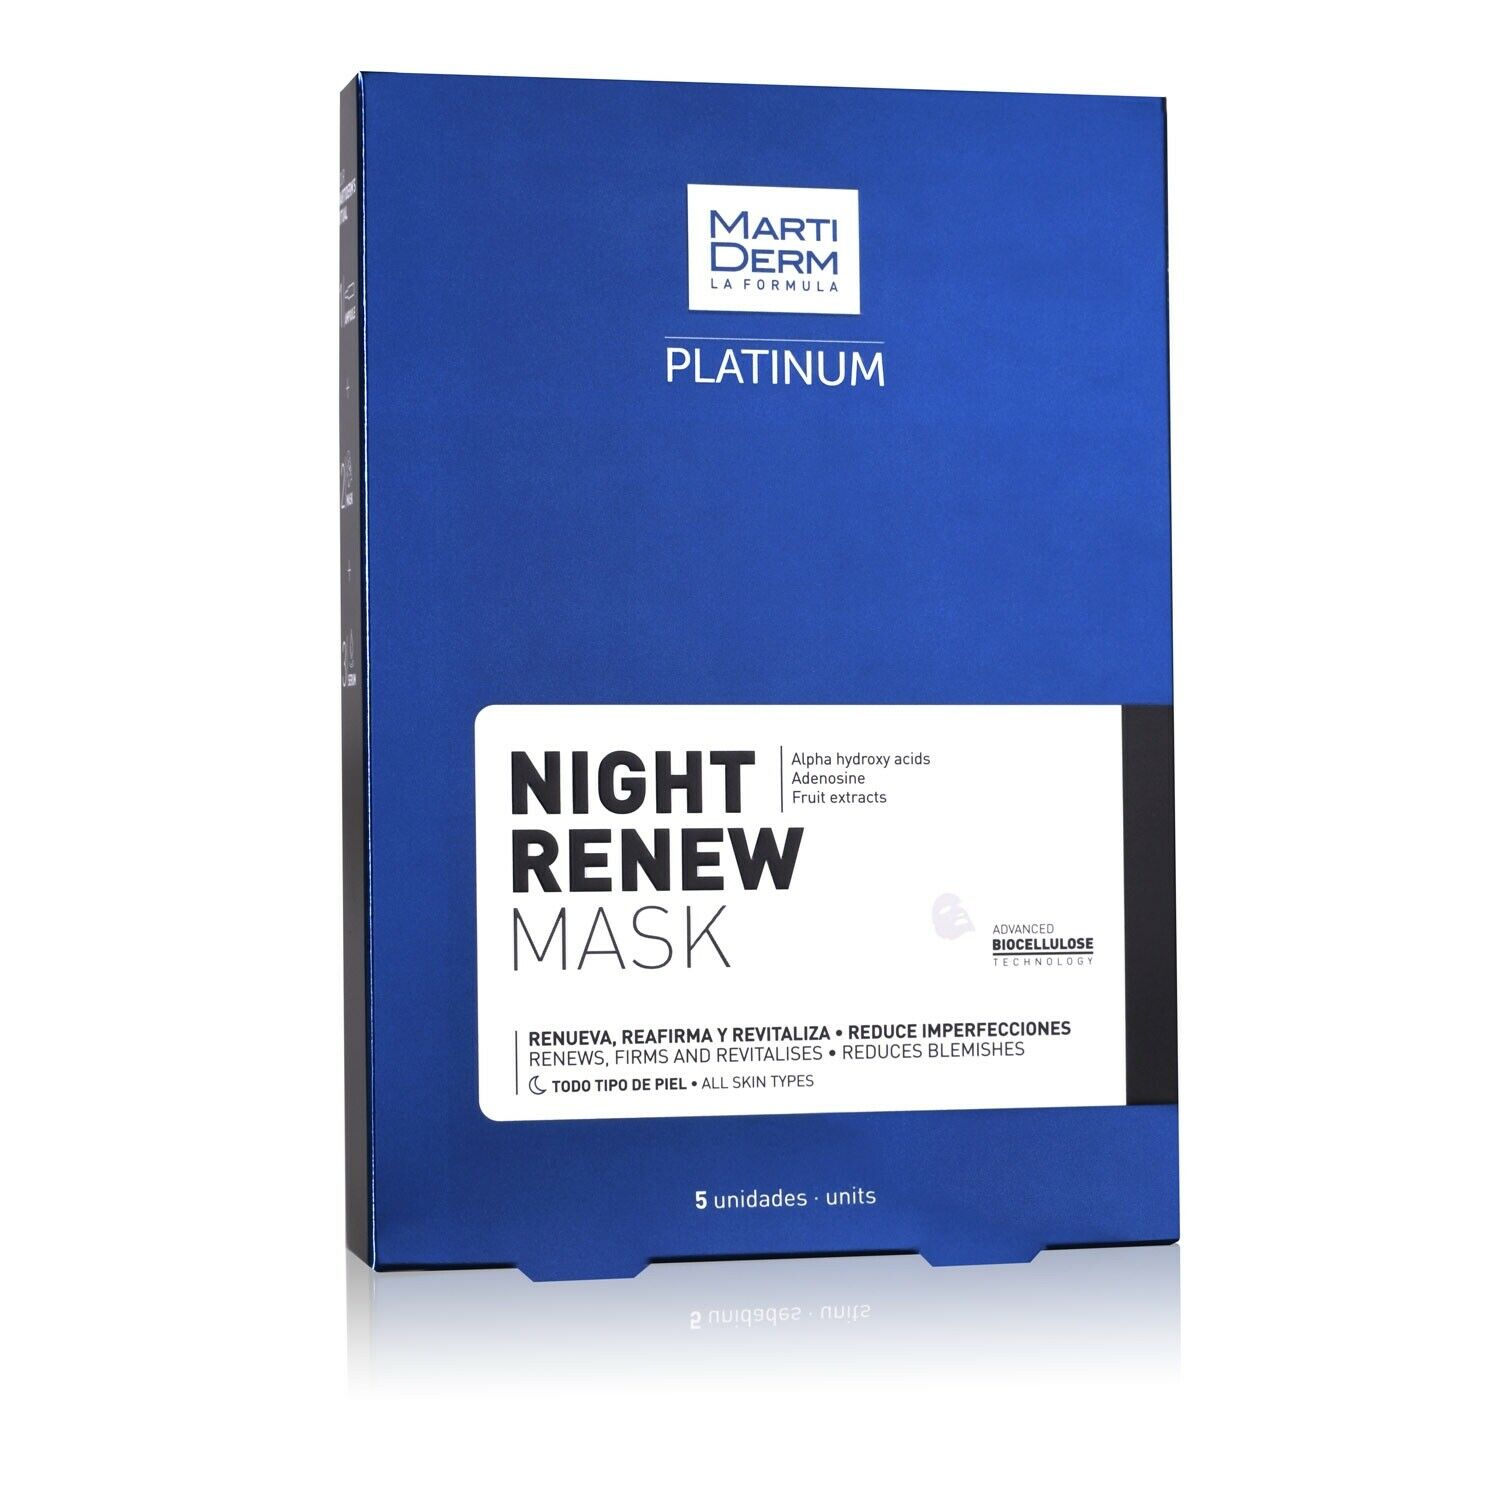 MartiDerm LA Formula Platinum Alpha Hydroxy Acids Night Renew Mask (x5 Masks)  MartiDerm night Intensive counteracts the signs of aging and provides the skin with optimal evenness, firmness and moisturisation  Suitable for all skin types, deep wrinkles and blemishes  With active ingredients that renew and revitalise for a finer and silkier skin